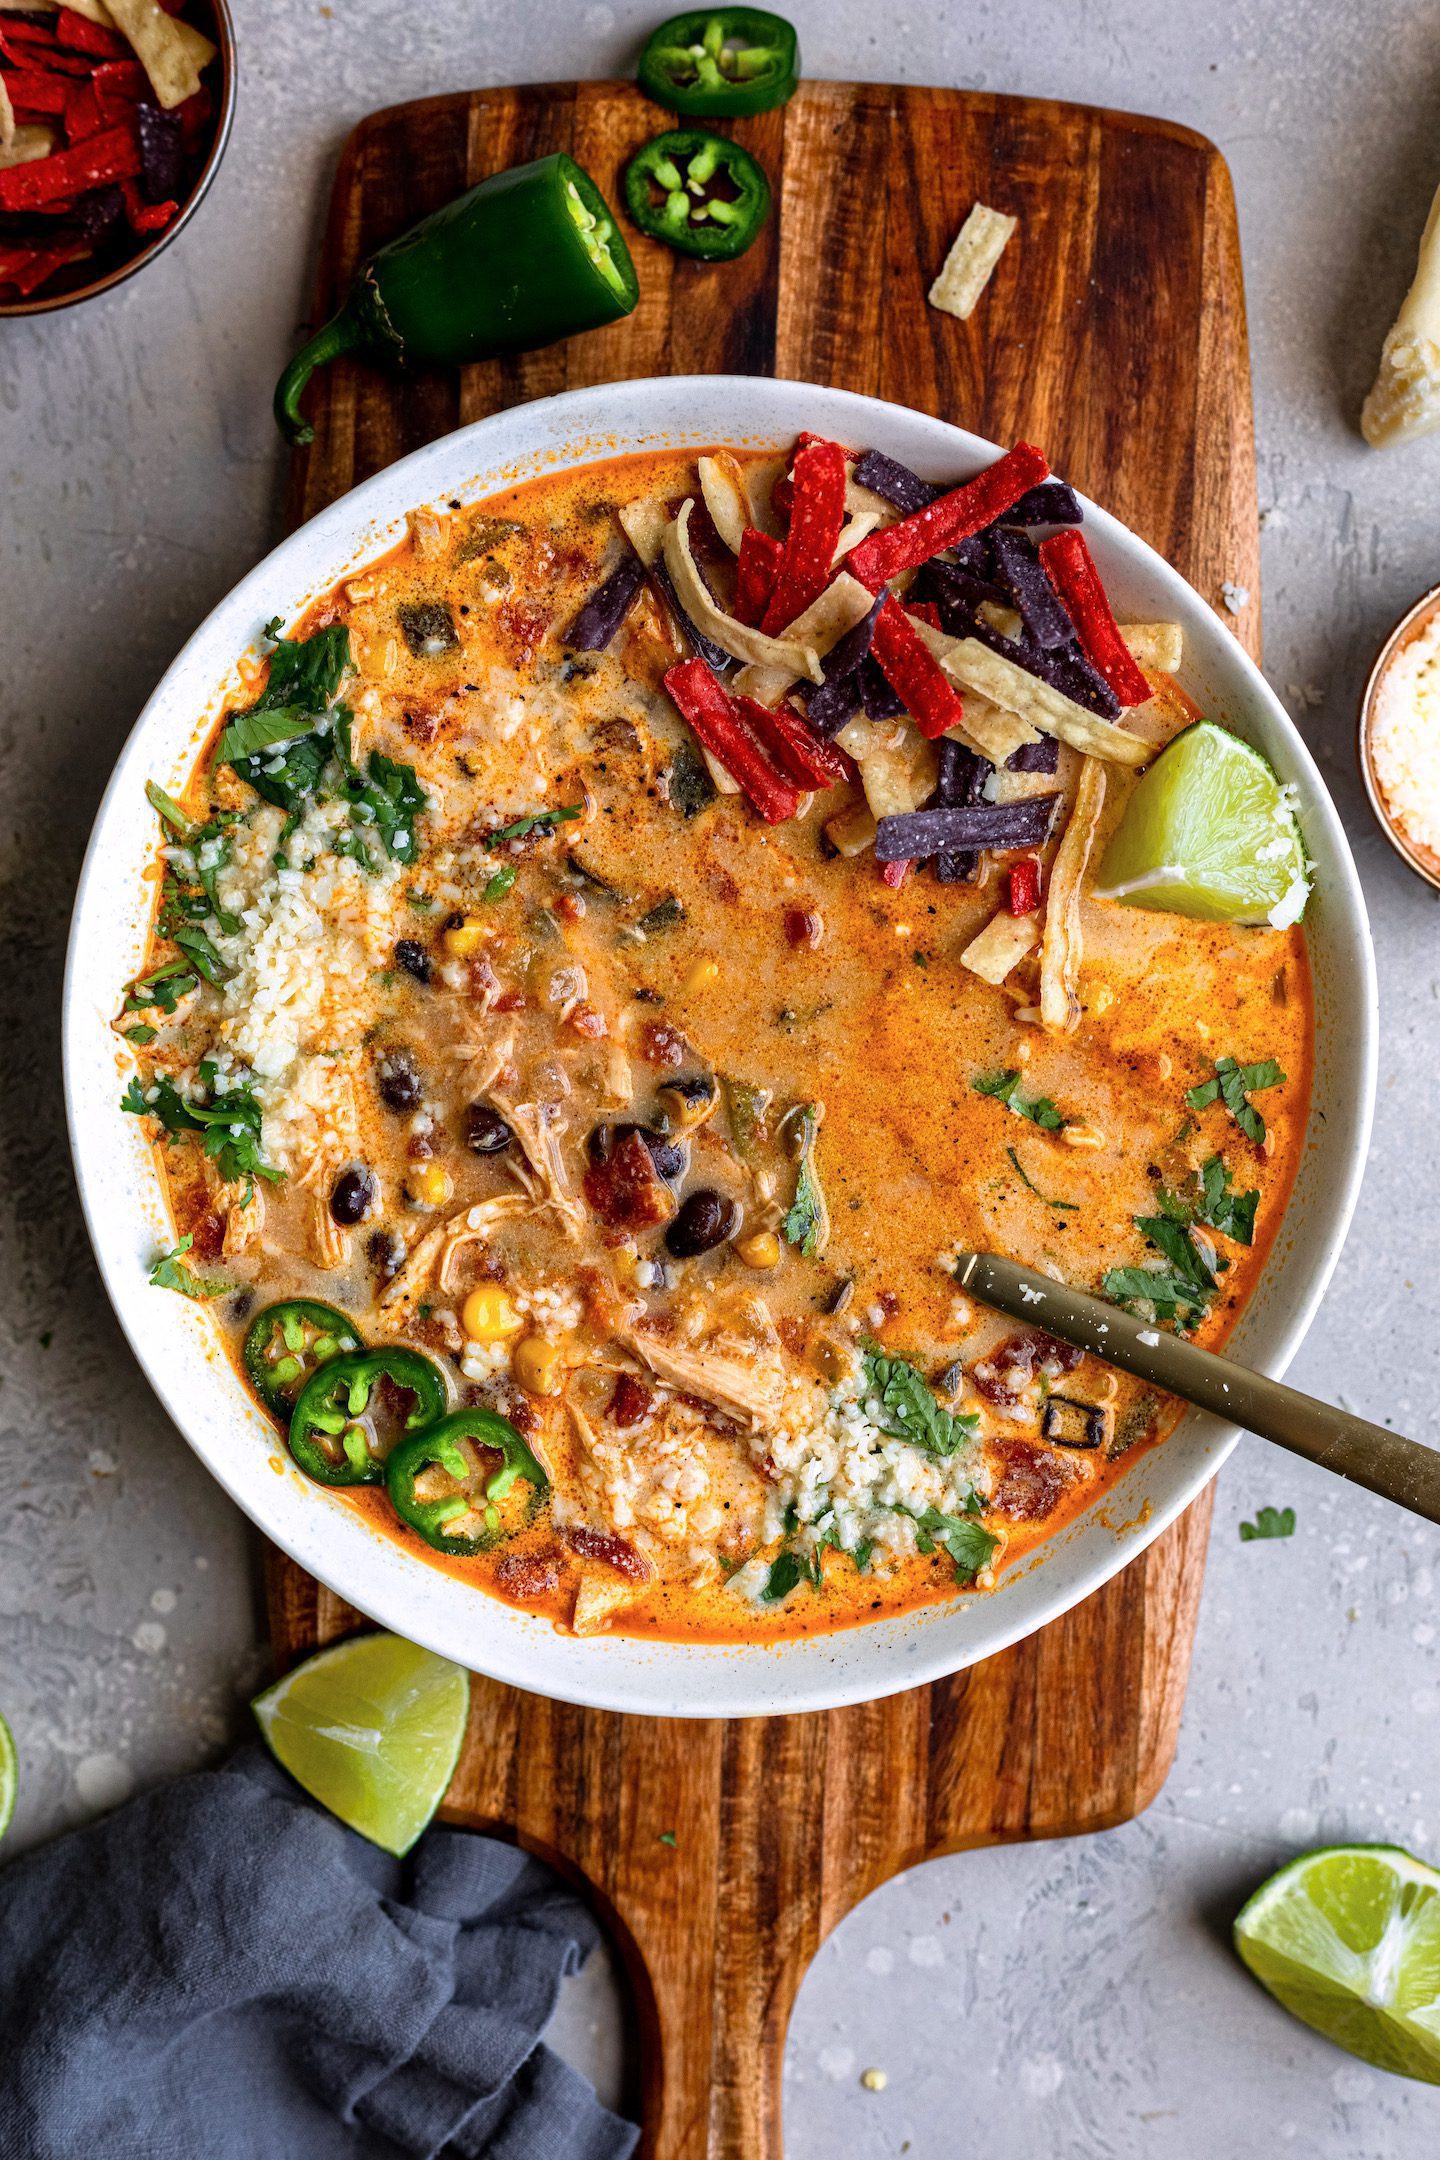 Slow-Cooker Chicken Tortilla Soup With All the Fixings Recipe